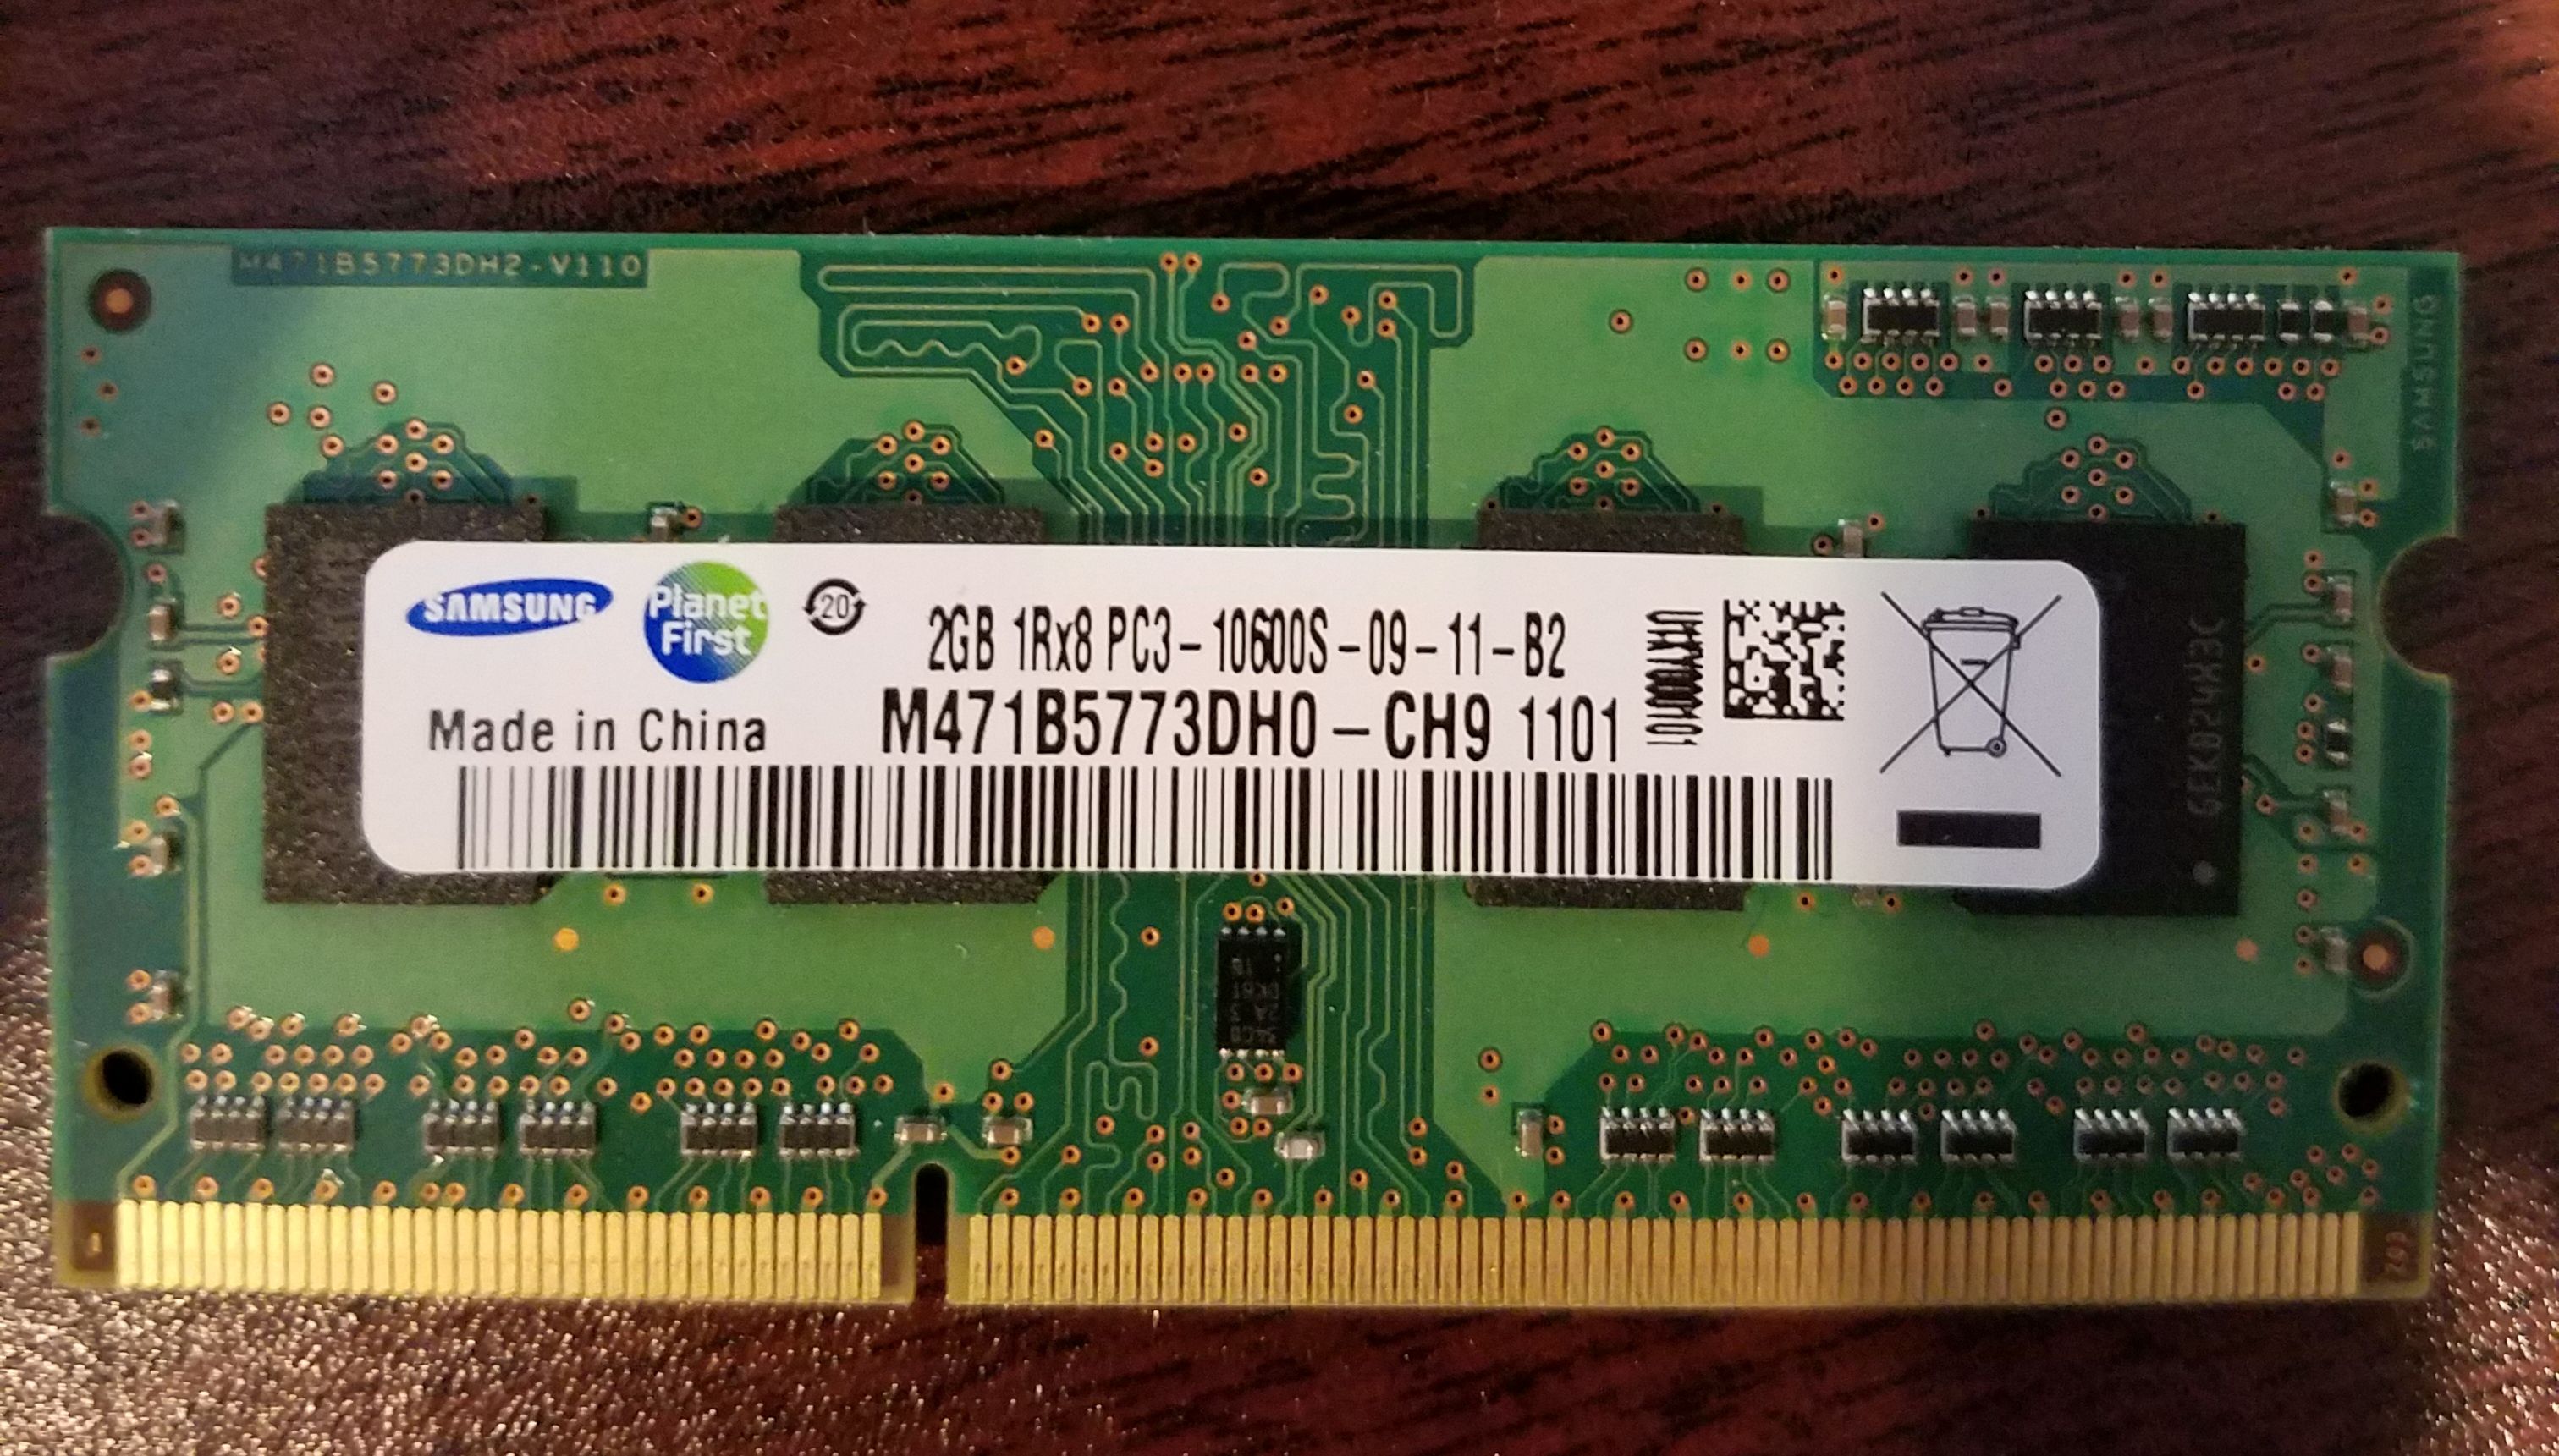 2 GB memory chip for a Windows PC